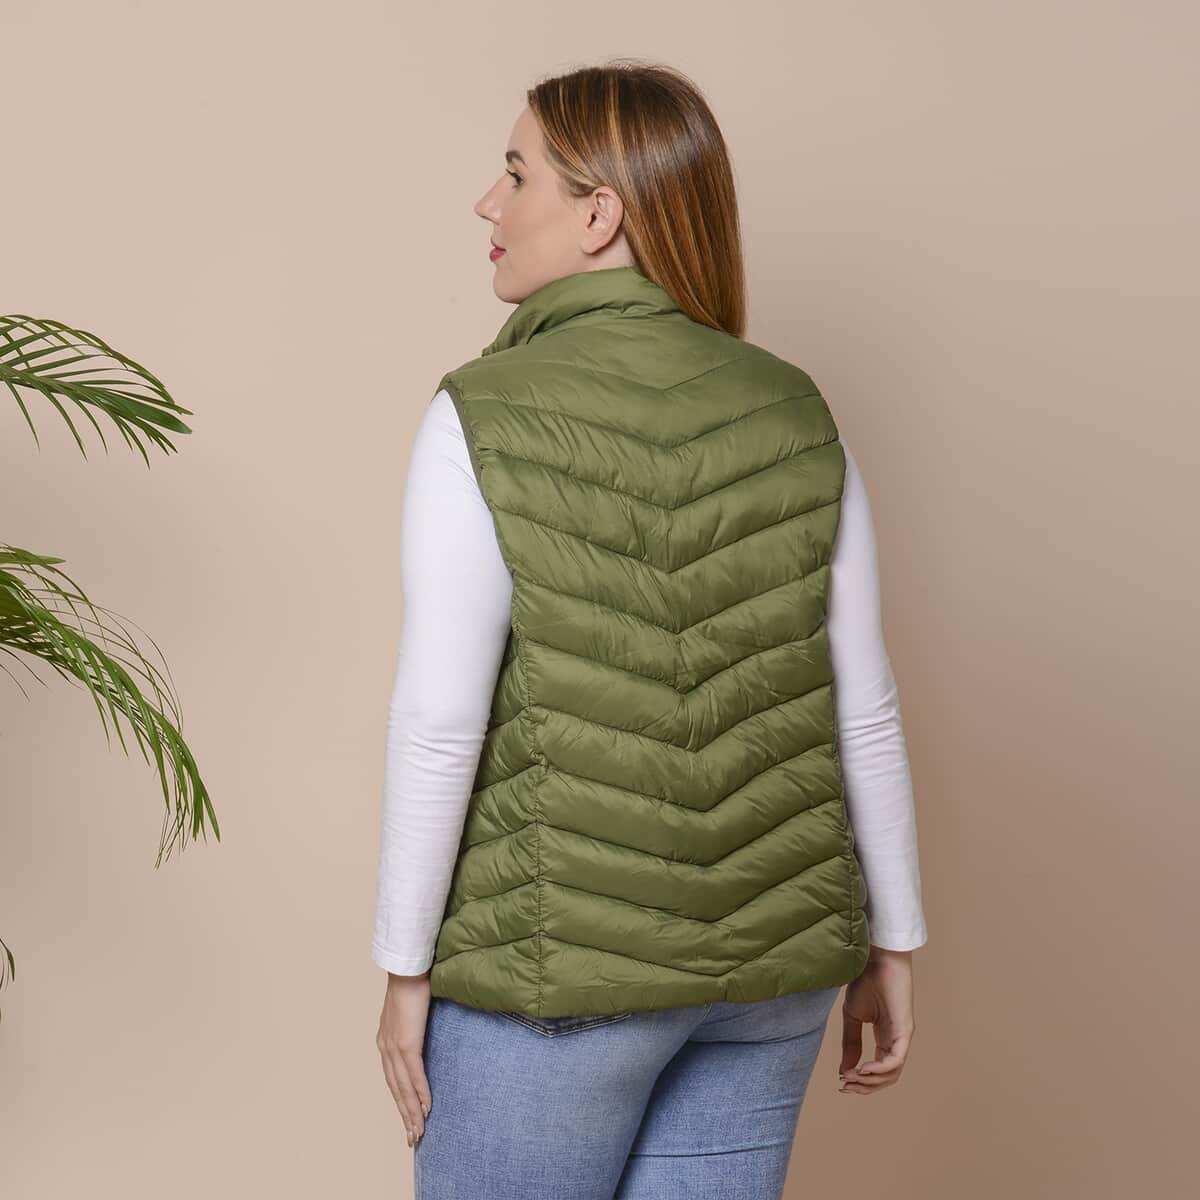 Passage Olive Green Women's Zip Front Puffer Vest with Pockets - L image number 1